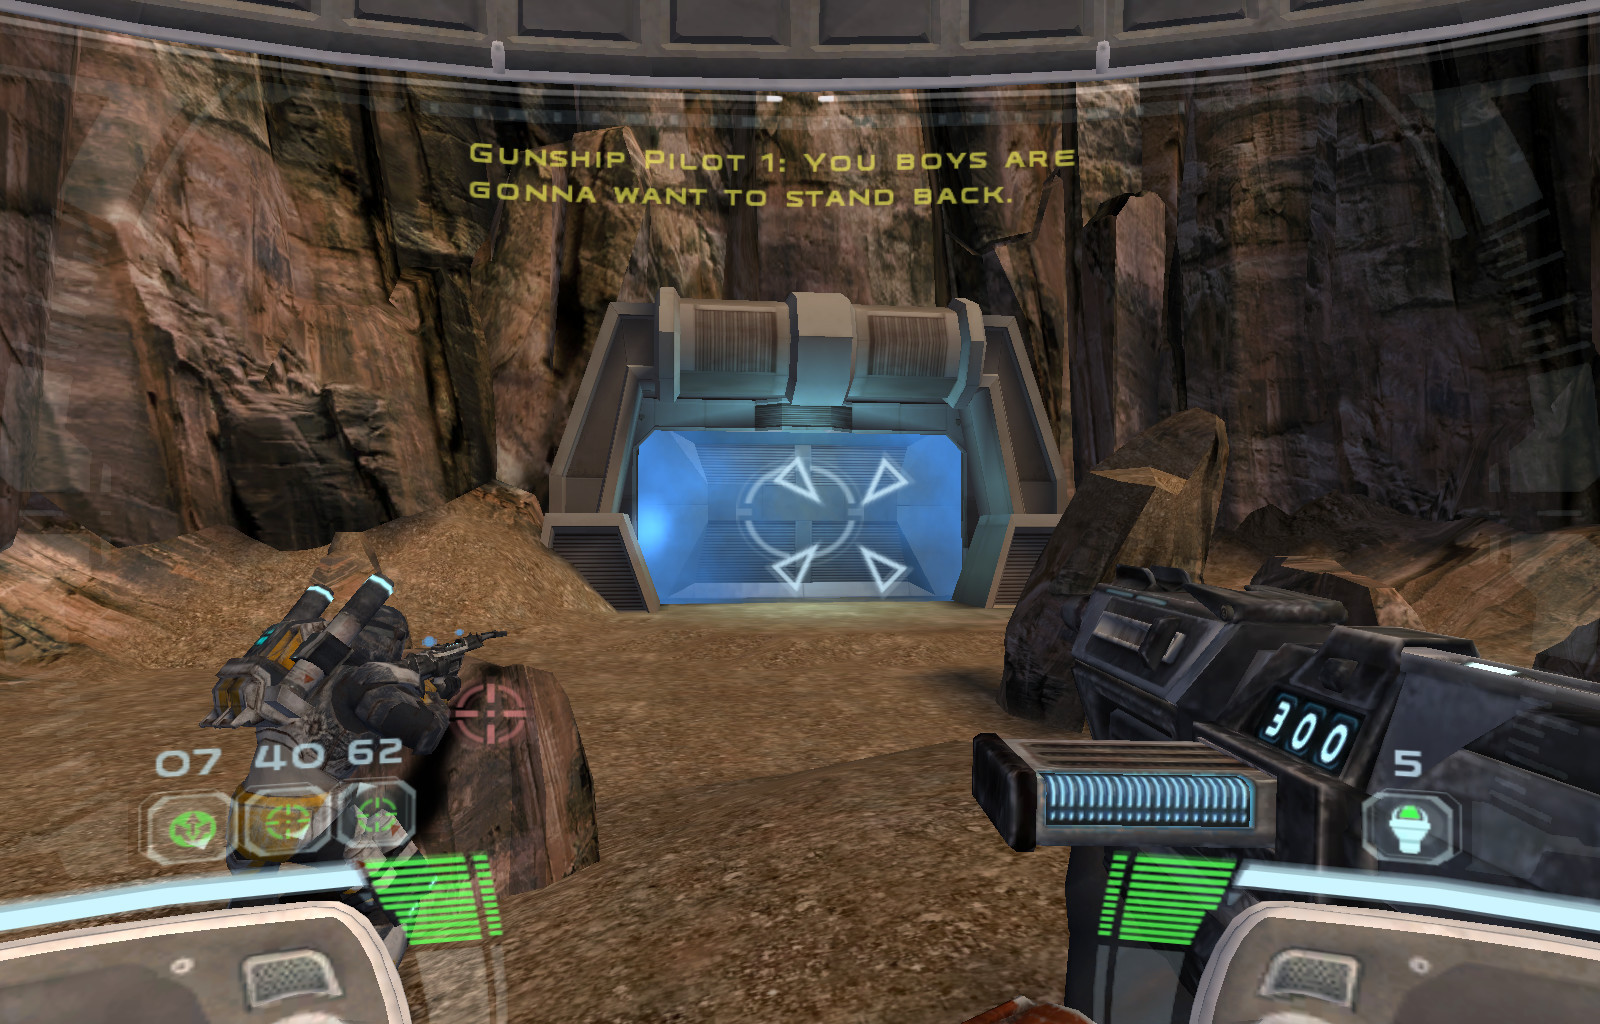 star wars games for pc windows 7 free download